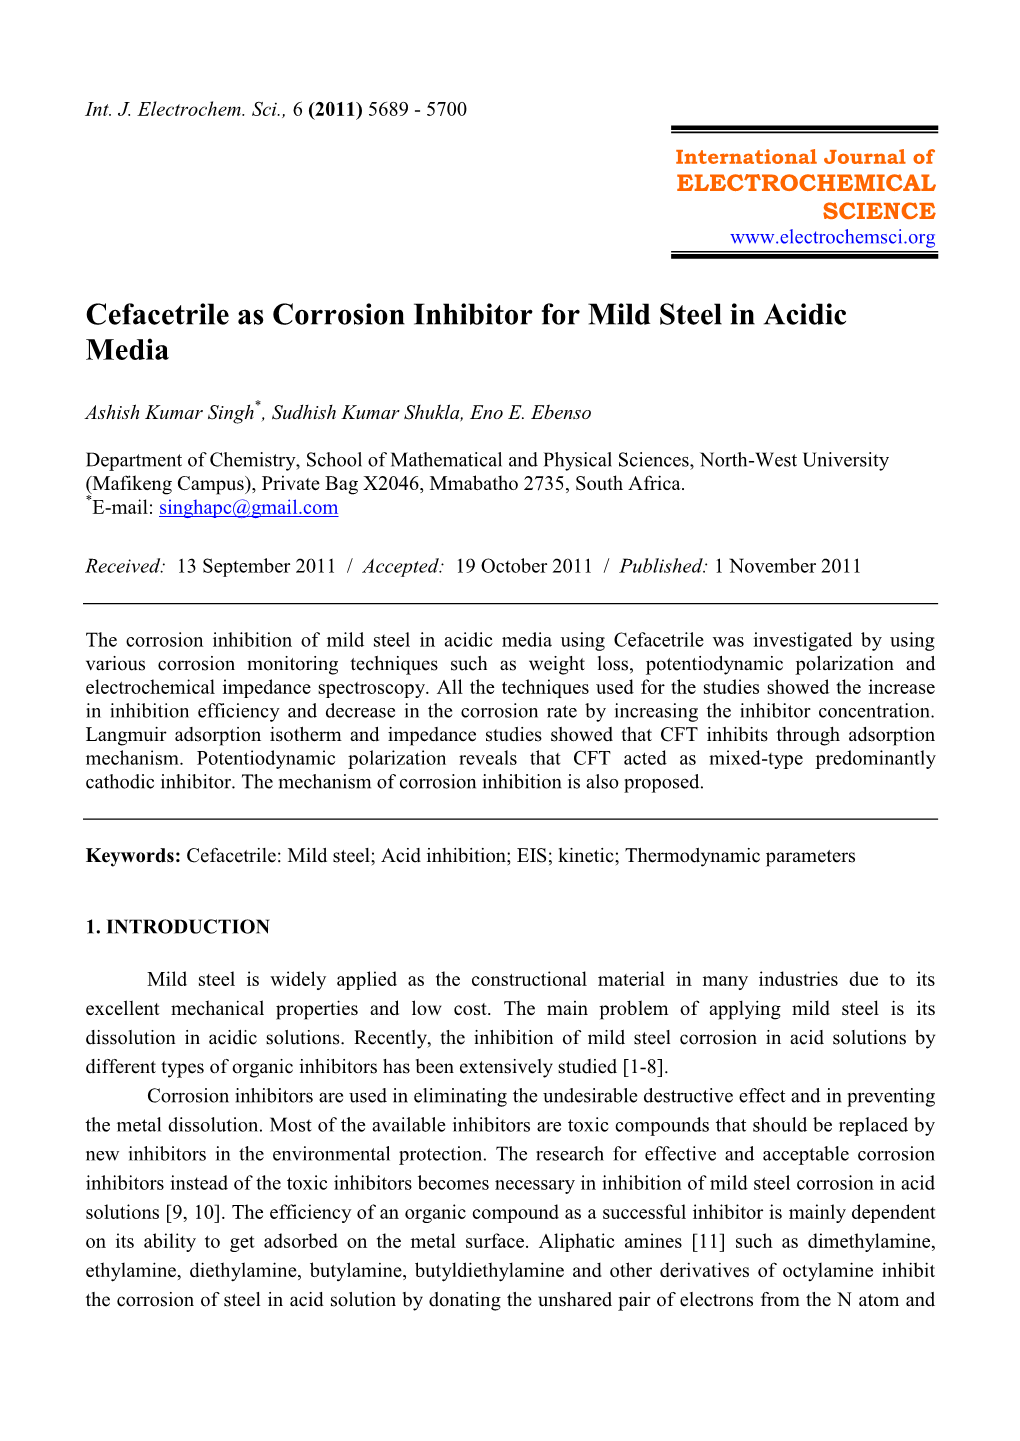 Cefacetrile As Corrosion Inhibitor for Mild Steel in Acidic Media